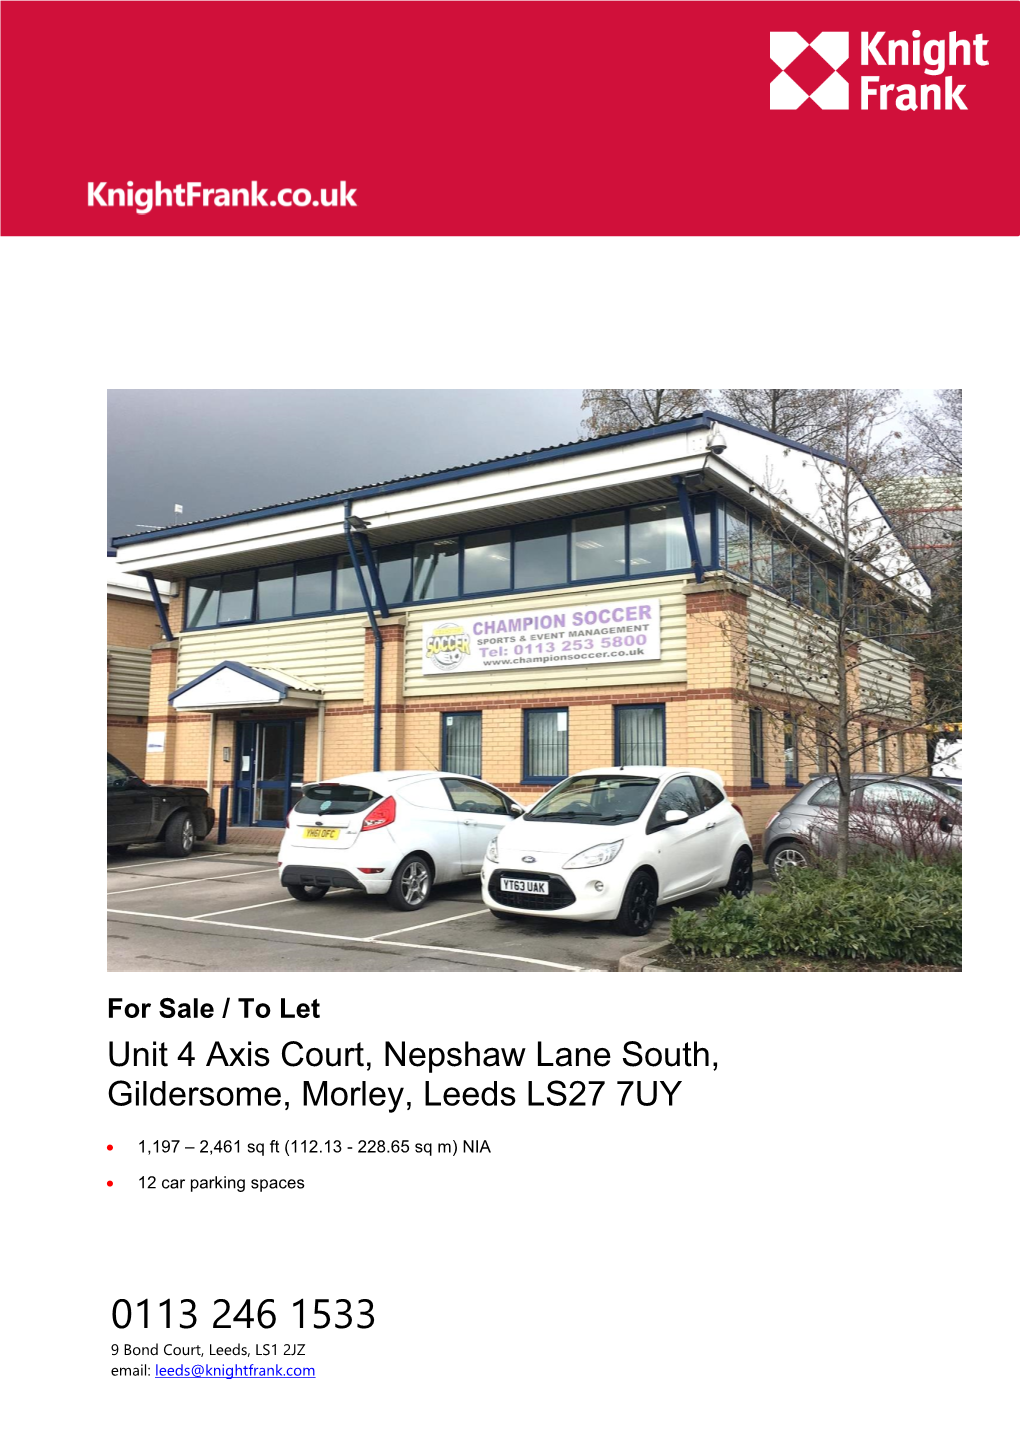 Unit 4 Axis Court, Nepshaw Lane South, Gildersome, Morley, Leeds LS27 7UY